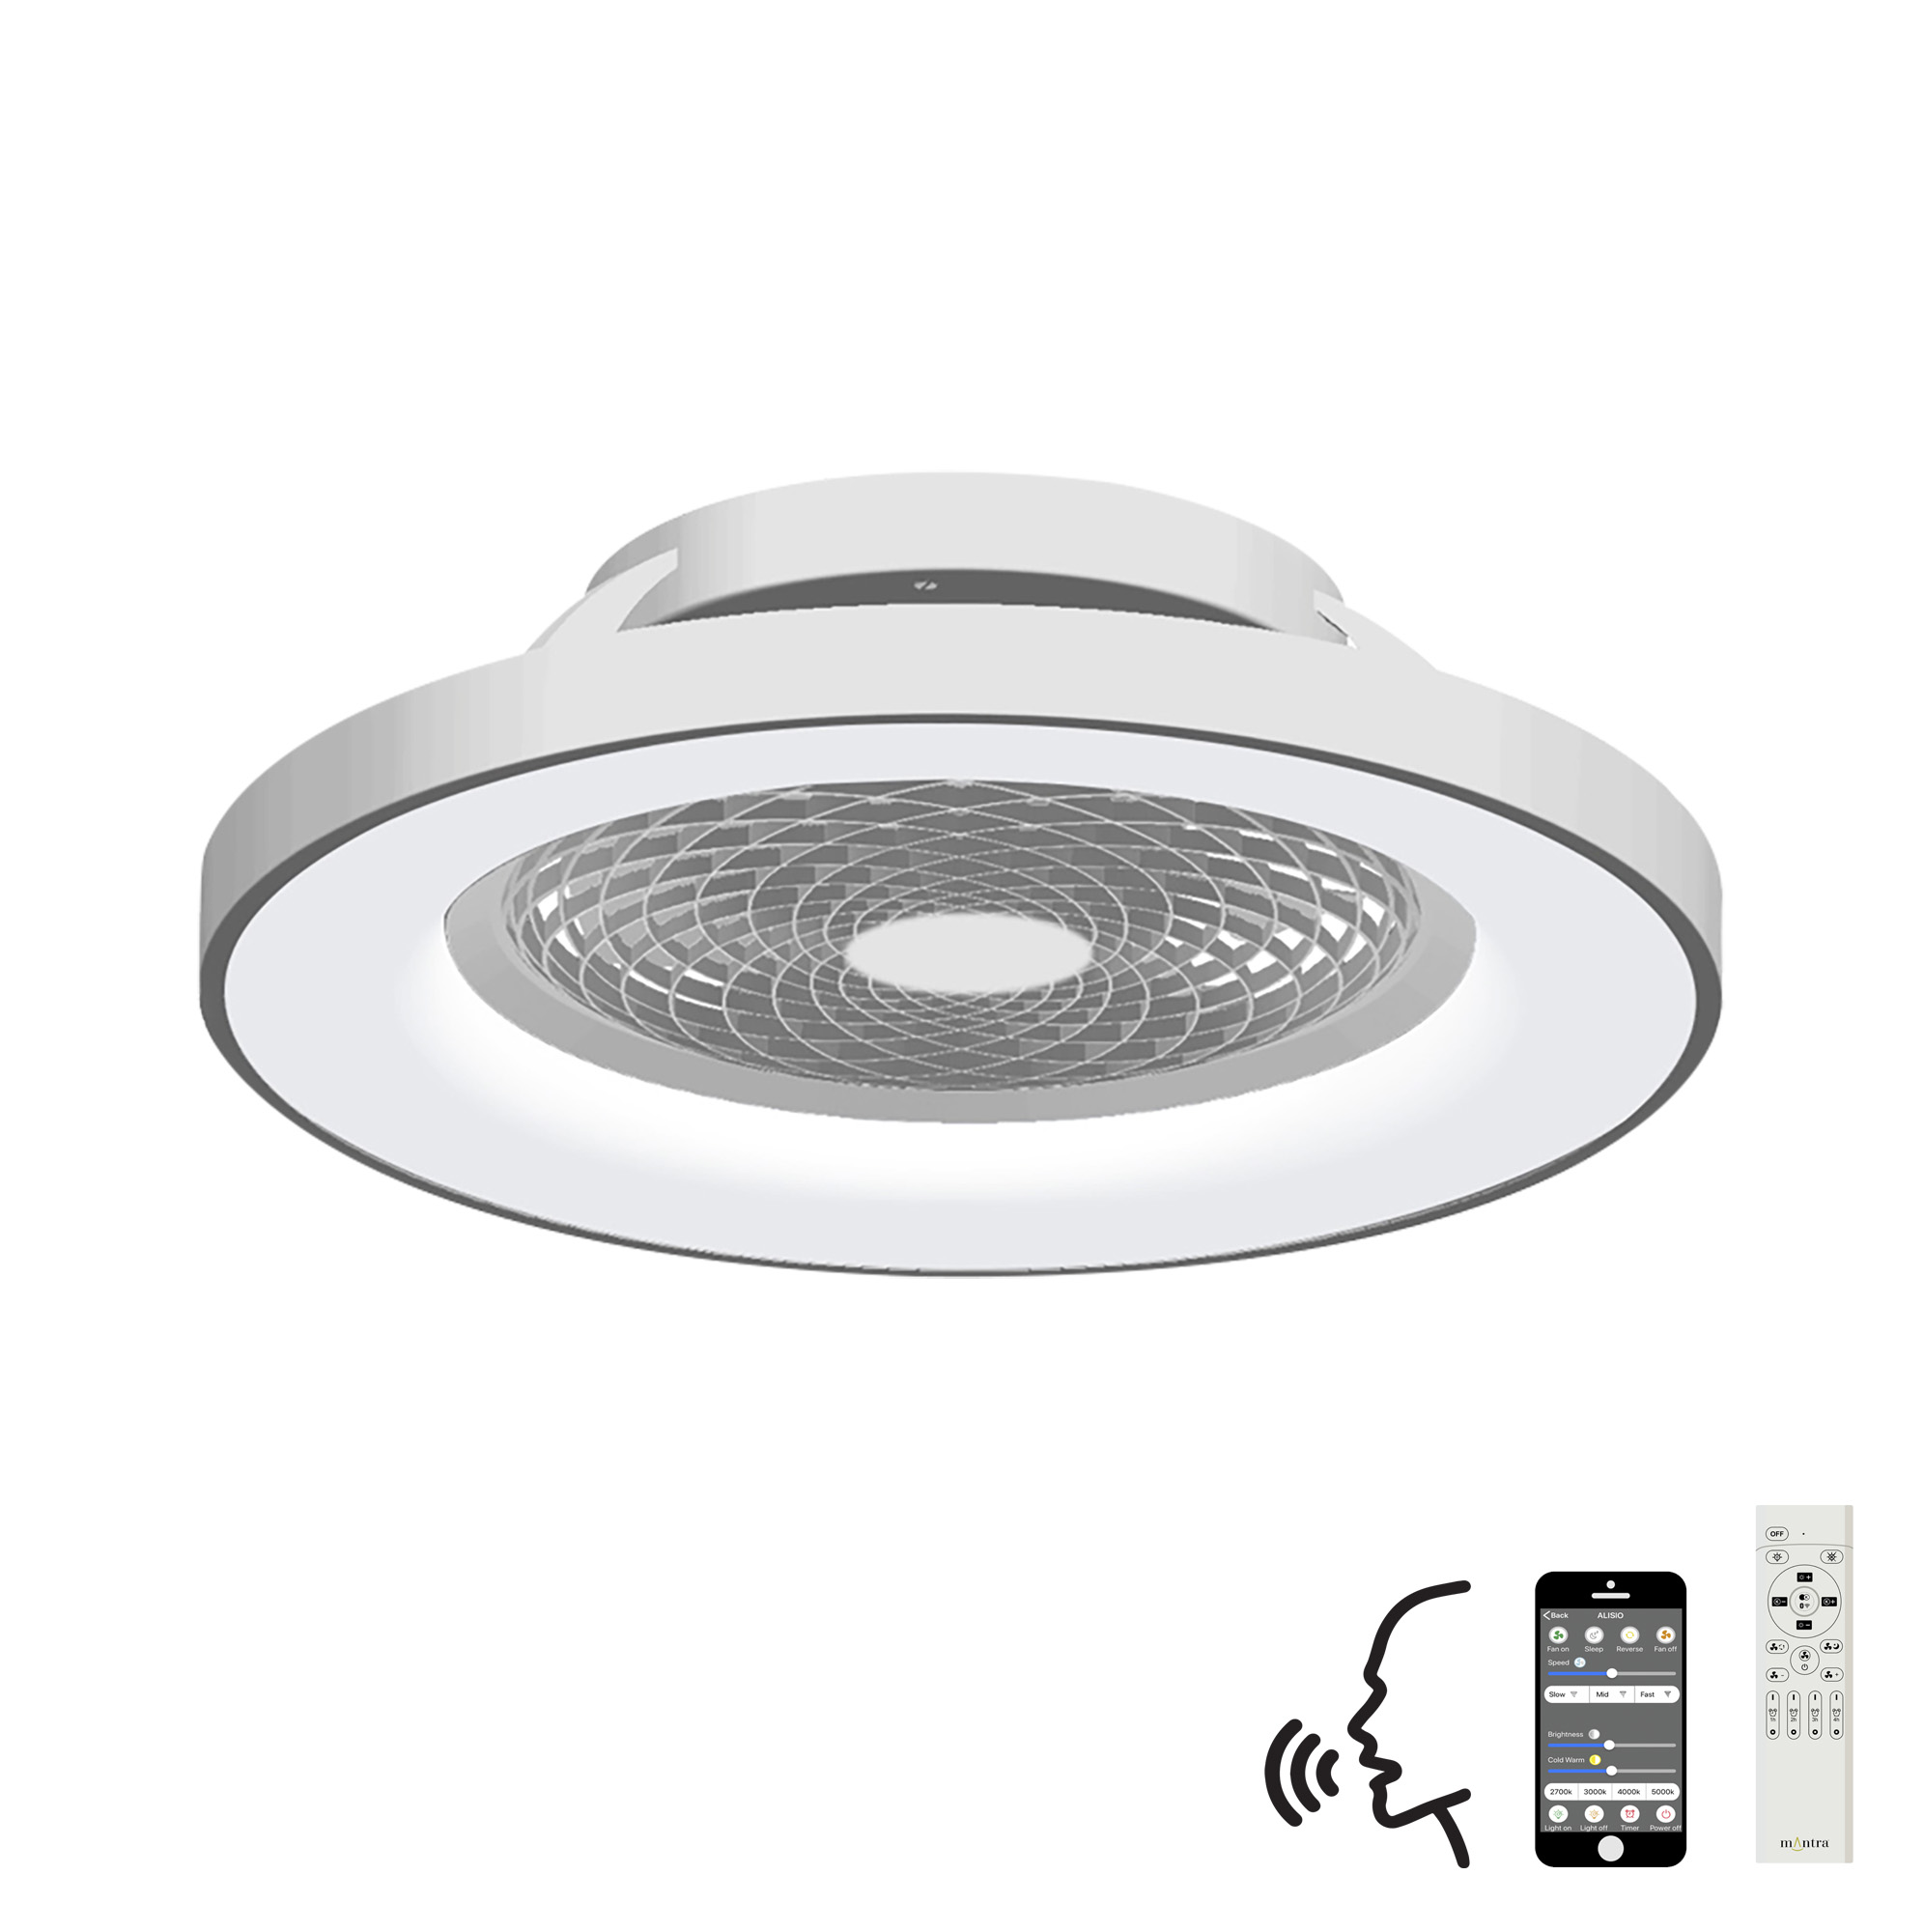 M7125  Tibet 70W LED Dimmable Ceiling Light & Fan, Remote / APP / Voice Controlled Silver